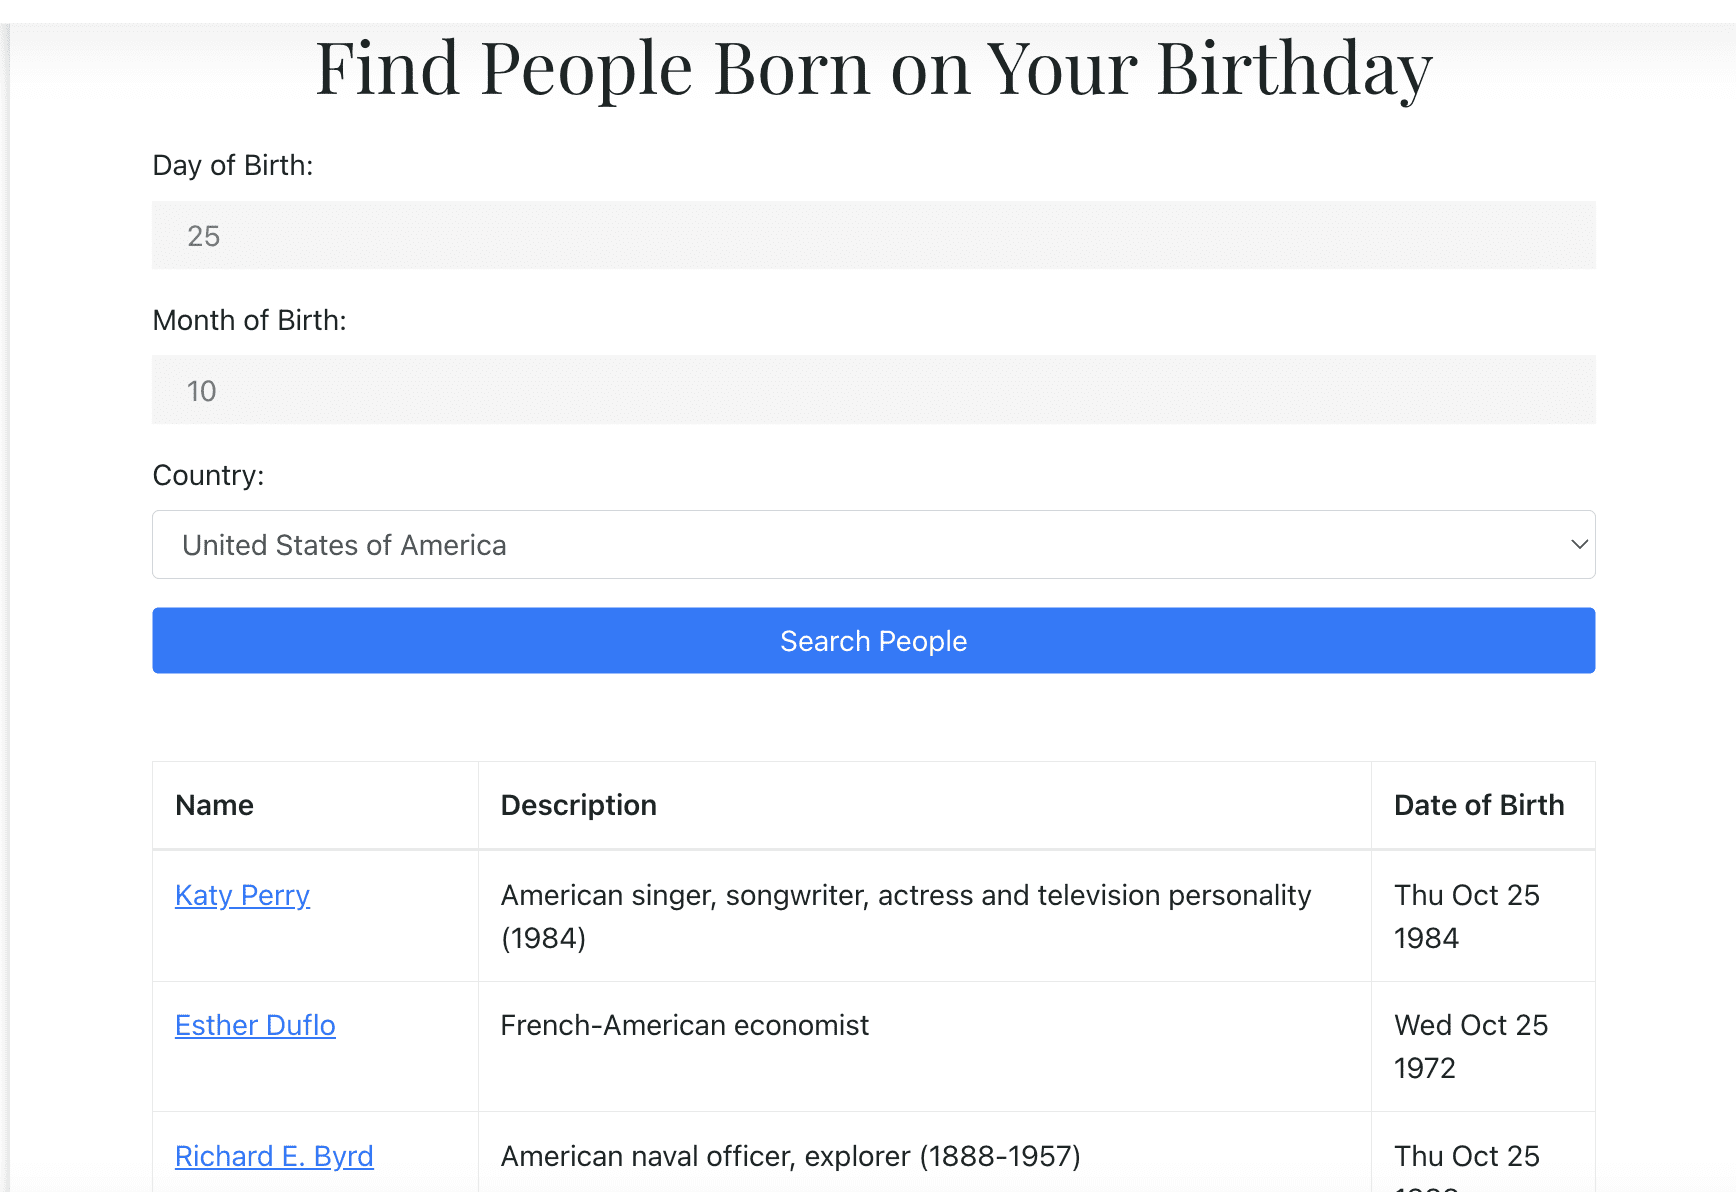 Find People Born on Your Birthday | Find Famous People Born on Your Birthday across the Globe